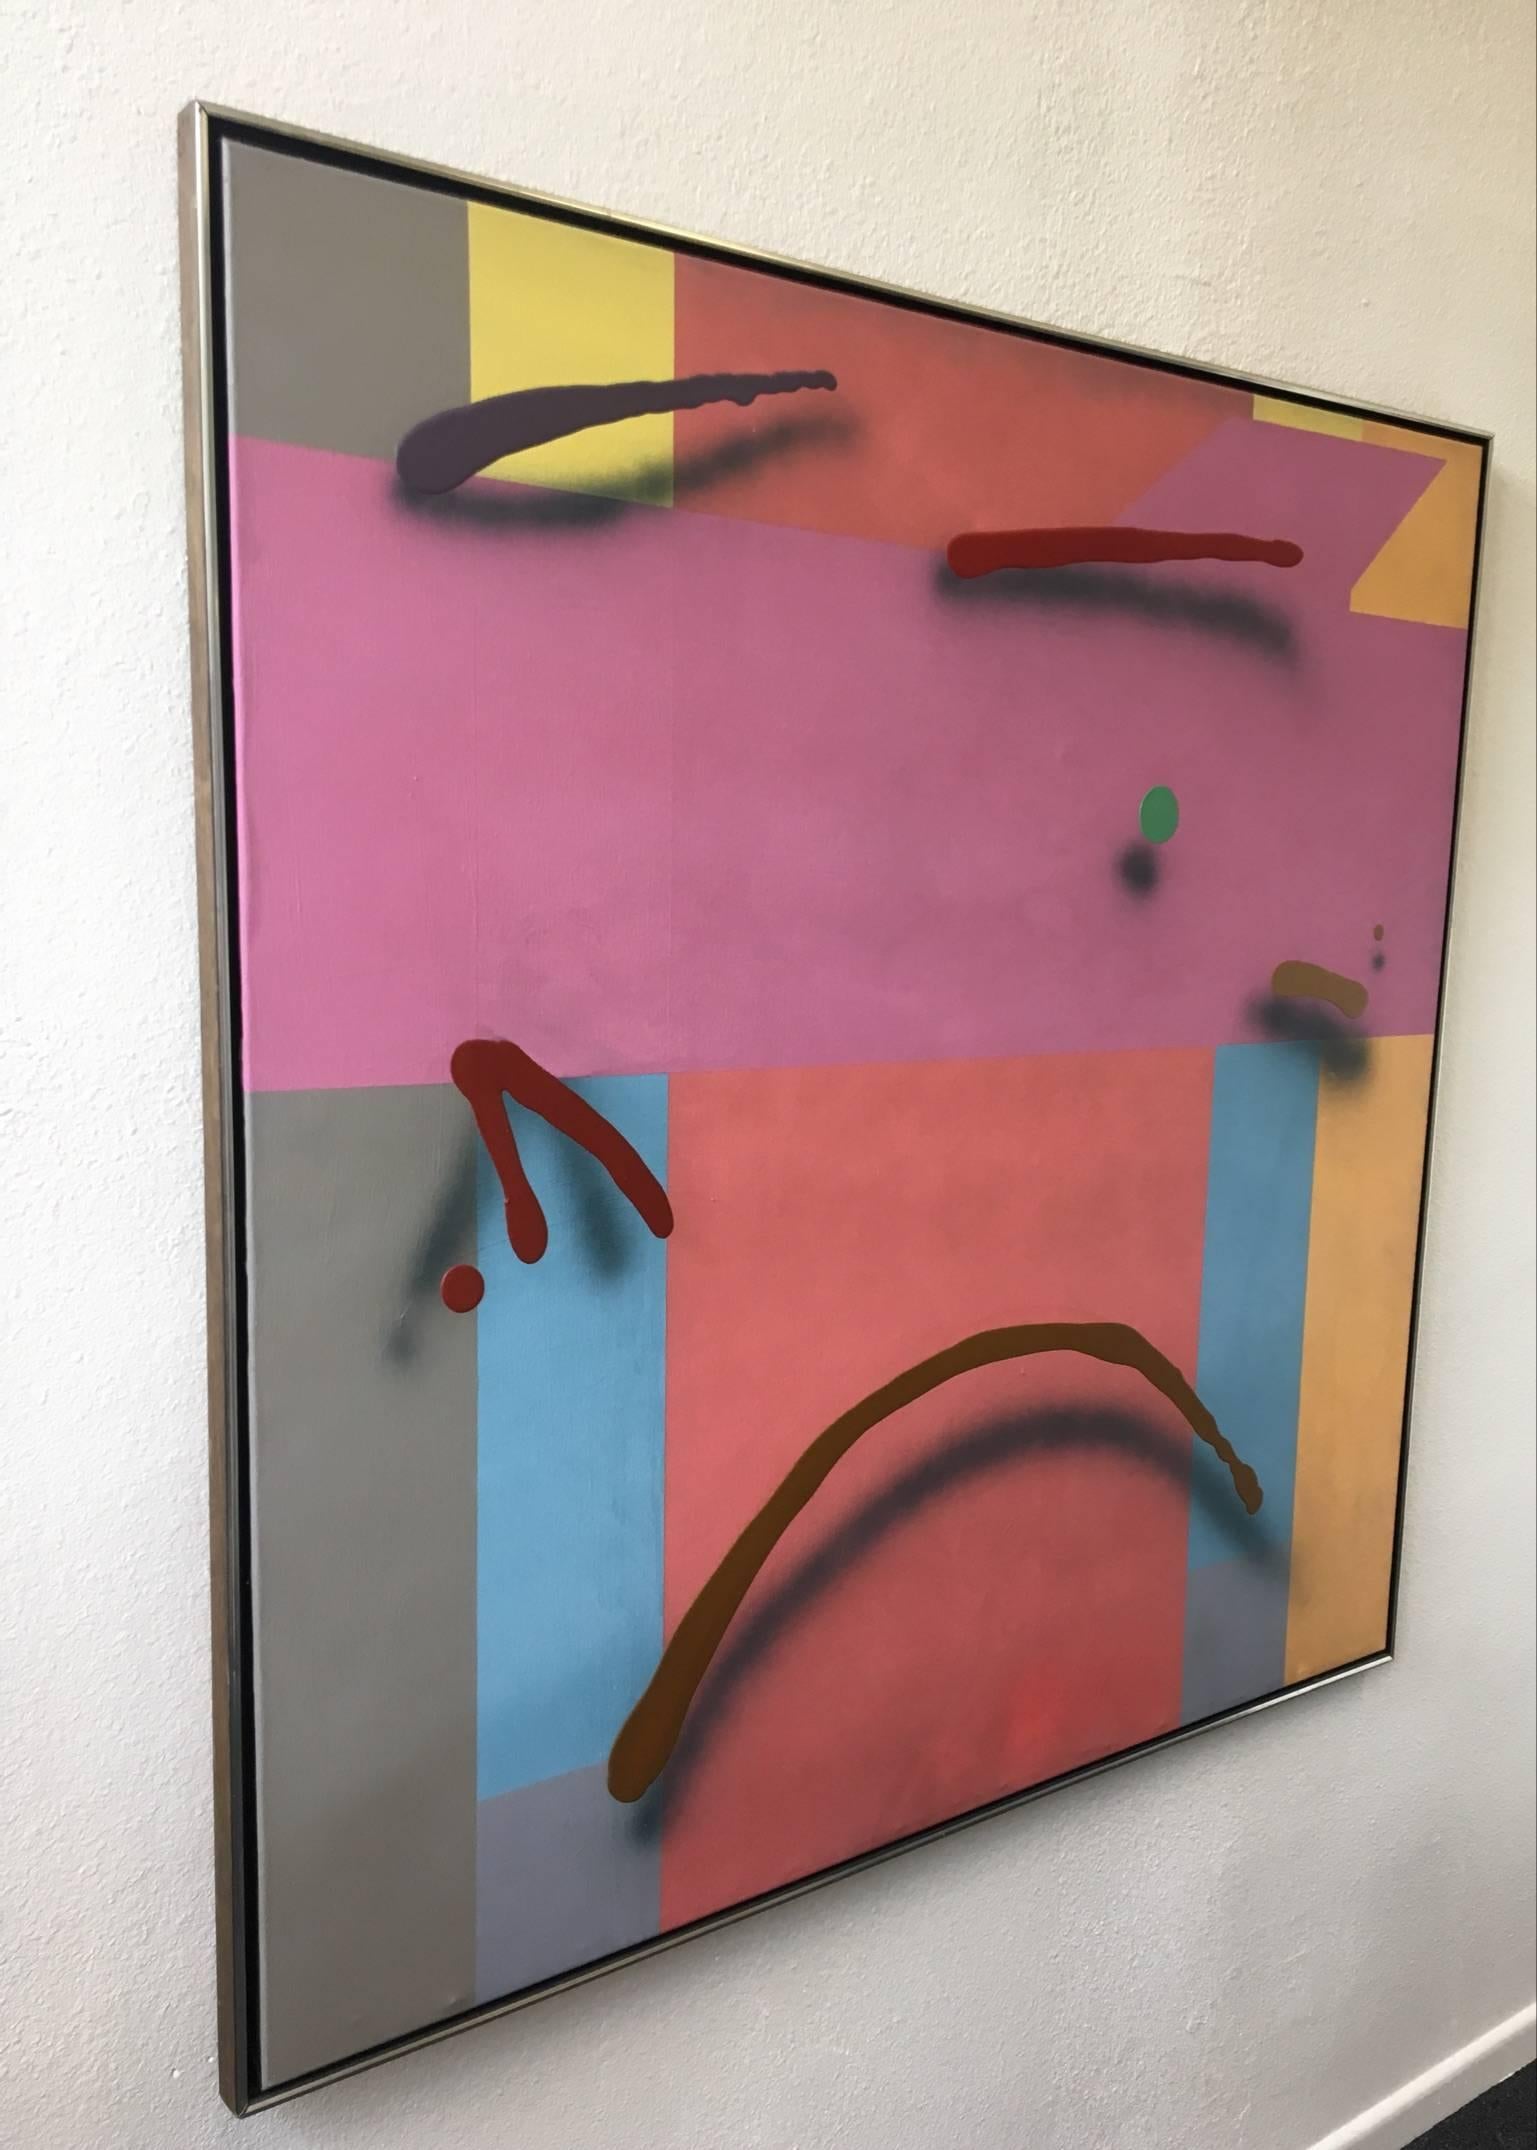 An original oil on canvas abstract painting from the 1980s by R. Weston.
The frame is original to the period.
The painting is signed Weston on the lower centre of the painting.